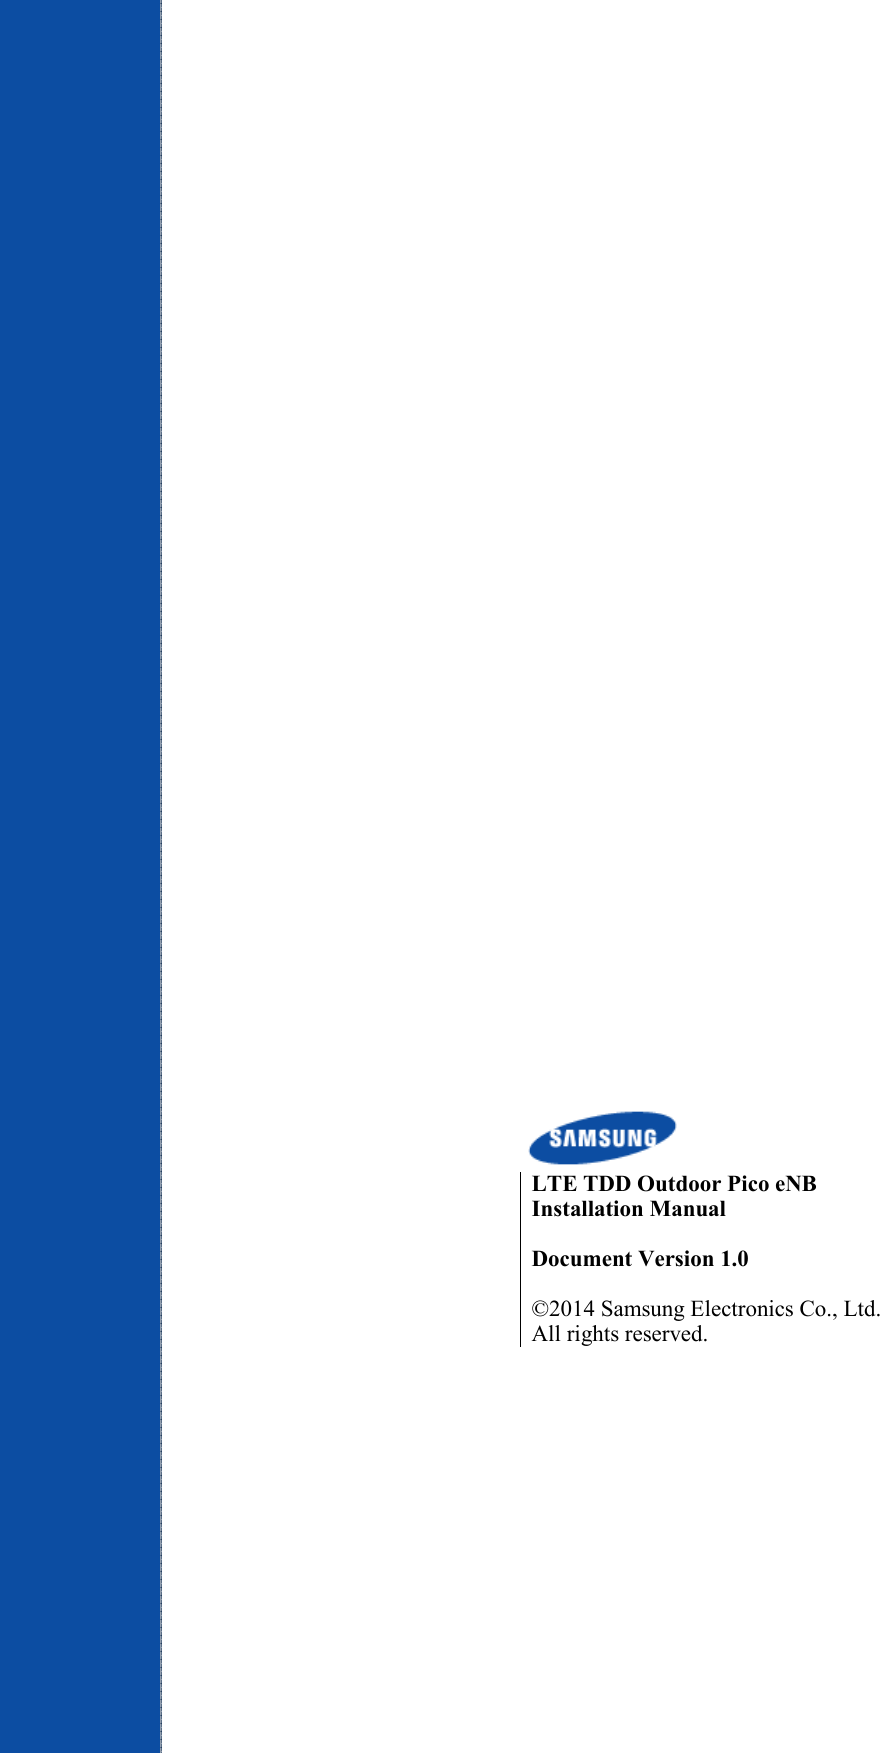           LTE TDD Outdoor Pico eNB Installation Manual    Document Version 1.0  ©2014 Samsung Electronics Co., Ltd. All rights reserved. 